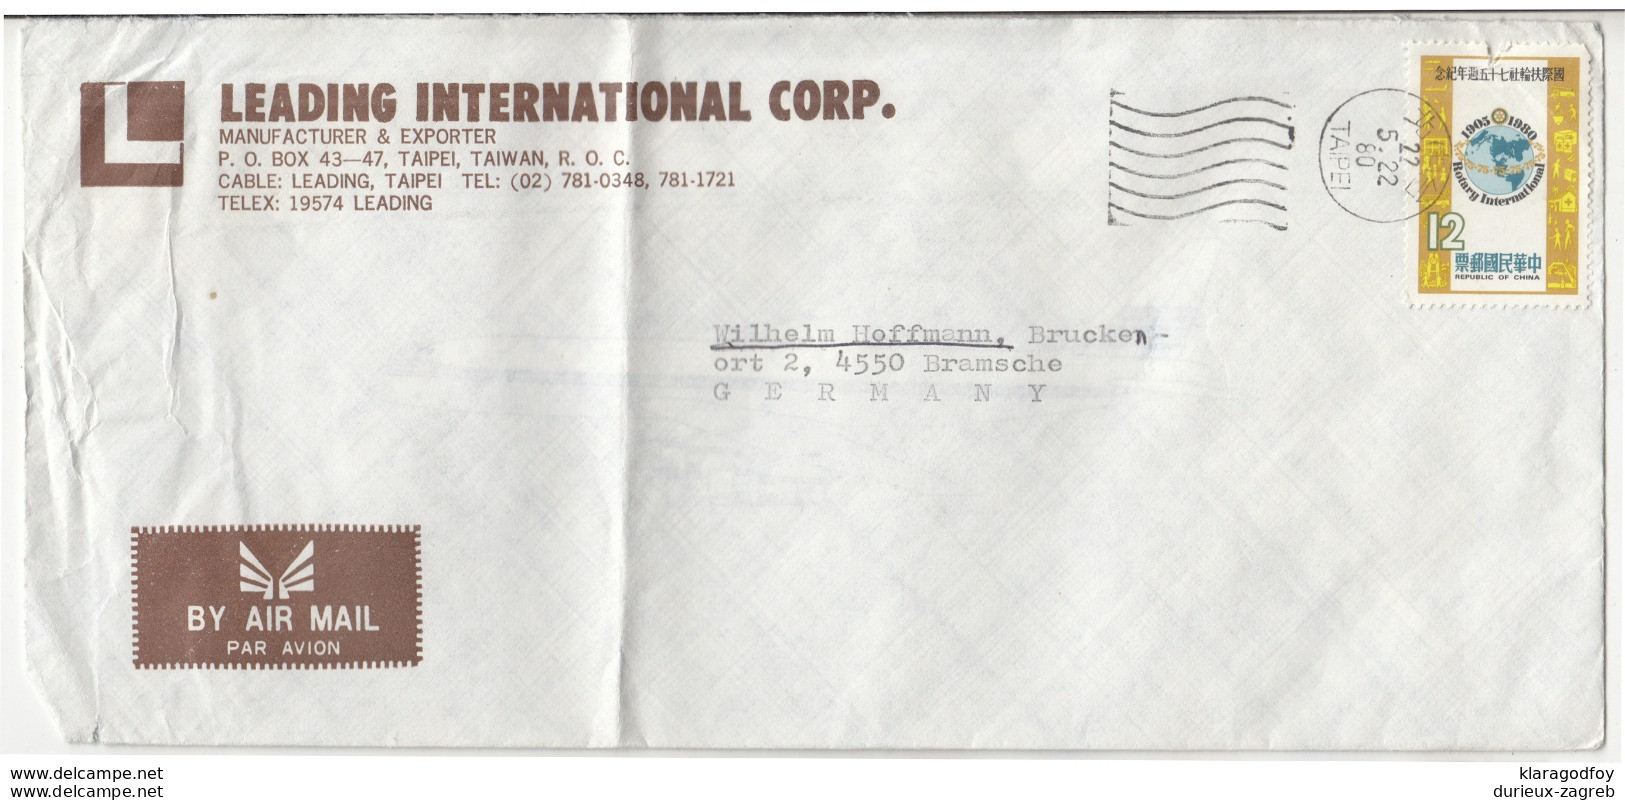 Leading International Taipei Company Air Mail Letter Cover Travelled 1980? To Germany B190922 - Cartas & Documentos